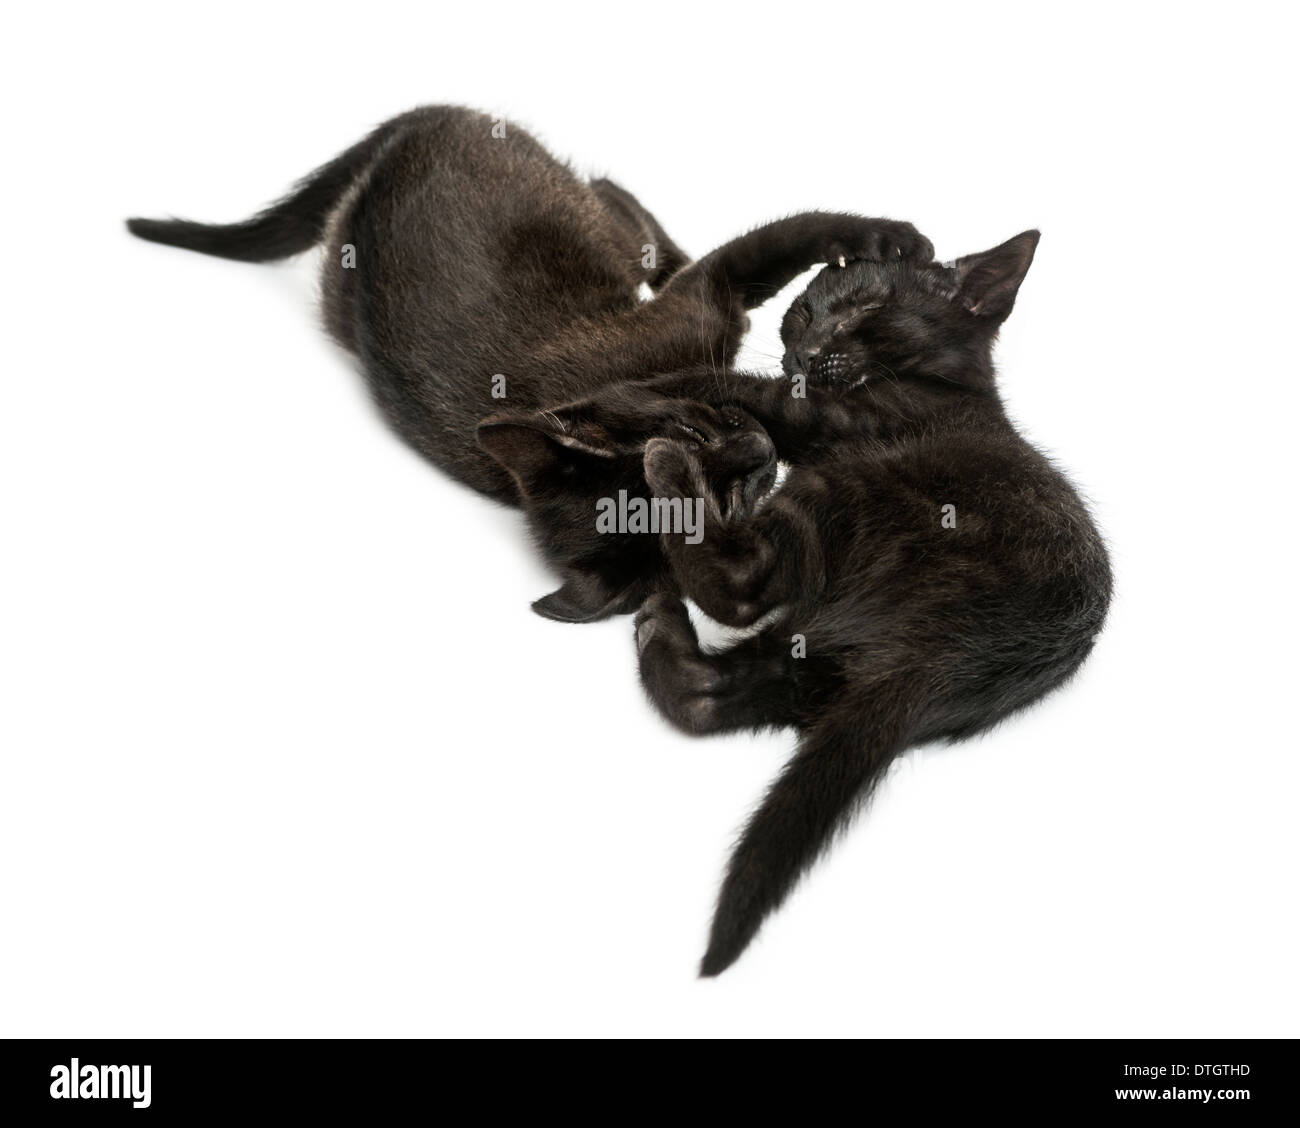 Two Black kittens playing, 2 months old, against white background Stock Photo